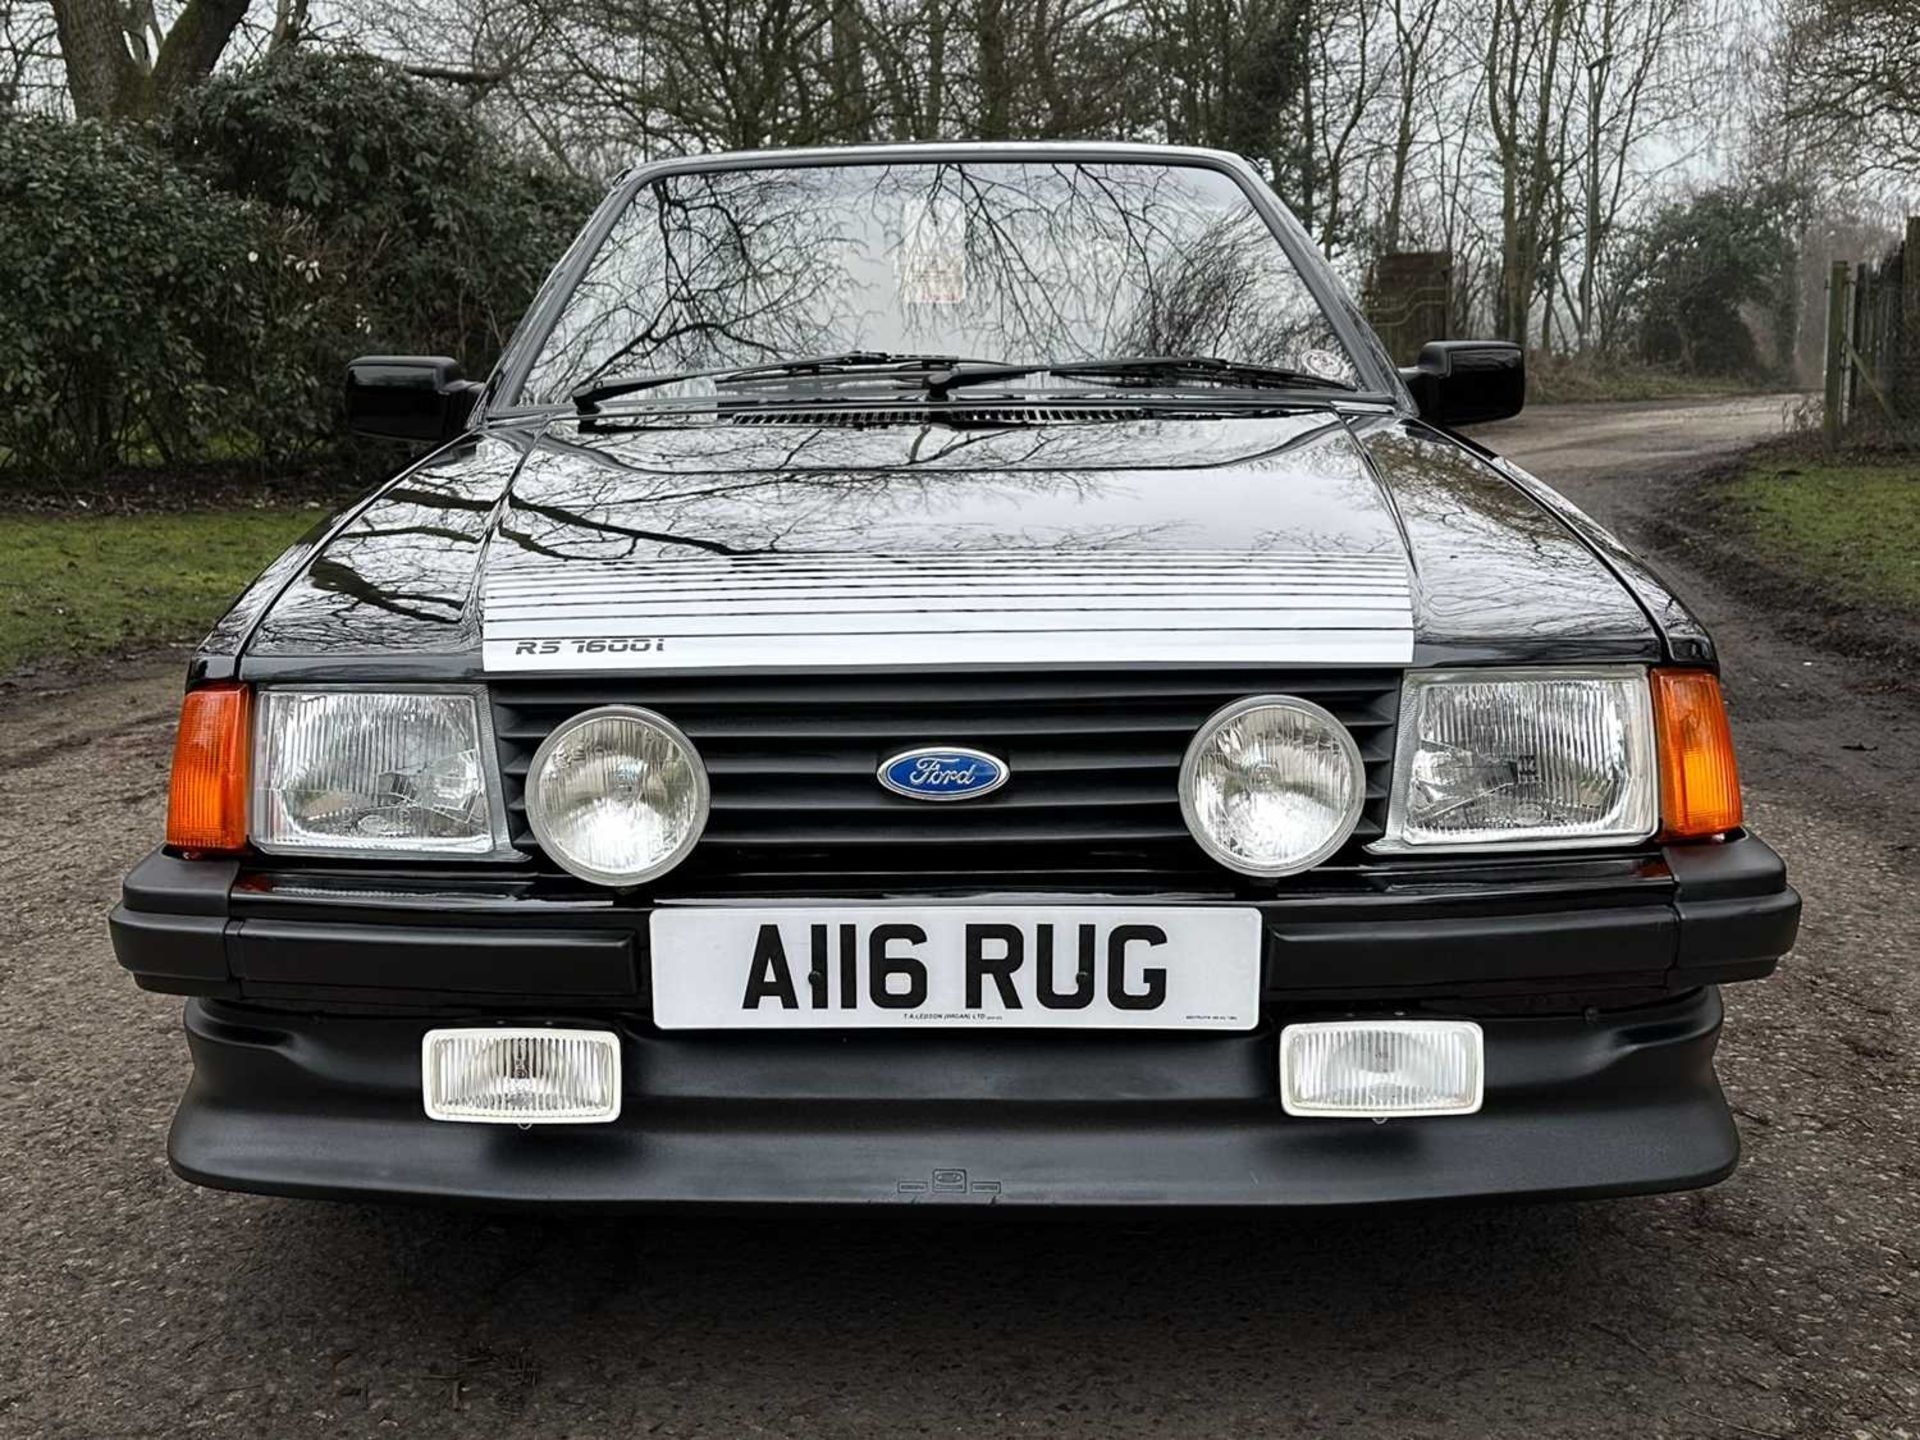 1983 Ford Escort RS1600i Entered from a private collection, finished in rare black - Image 10 of 100